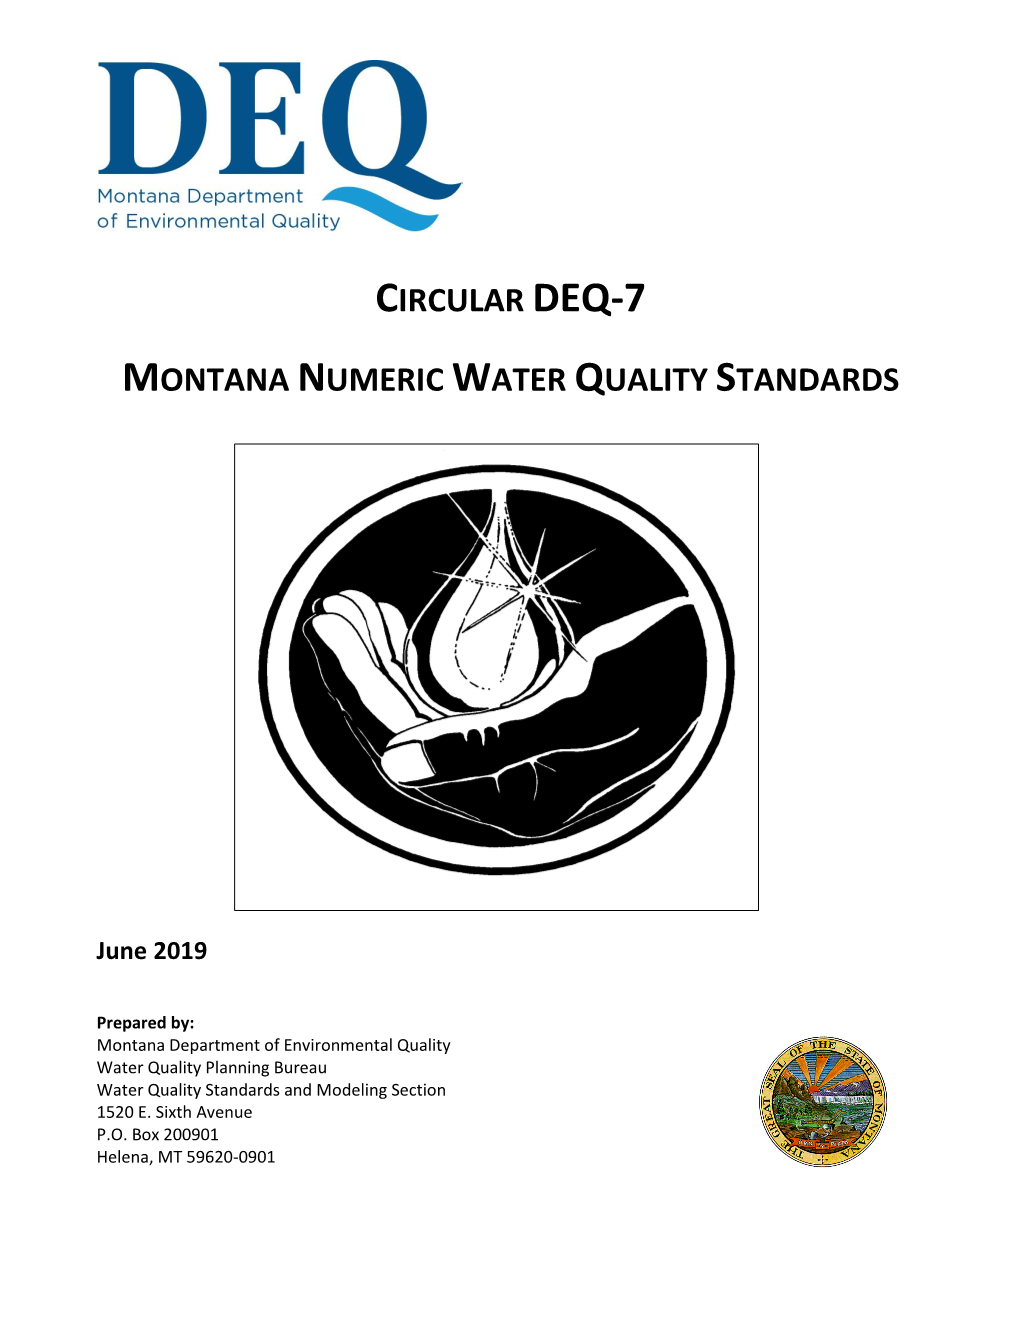 Numeric Water Quality Standards in DEQ-7